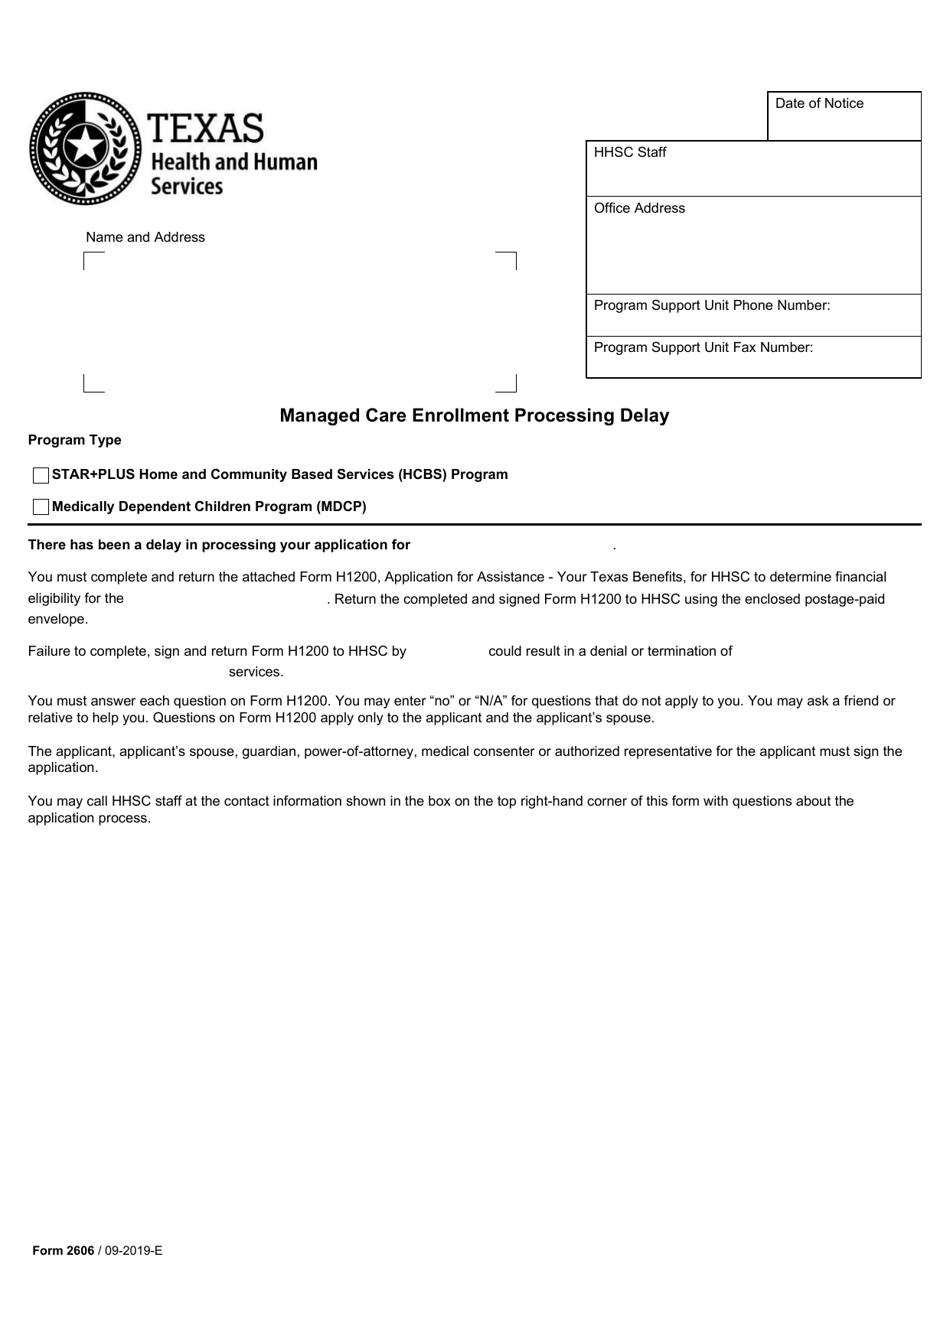 Form 2606 Managed Care Enrollment Processing Delay - Texas, Page 1